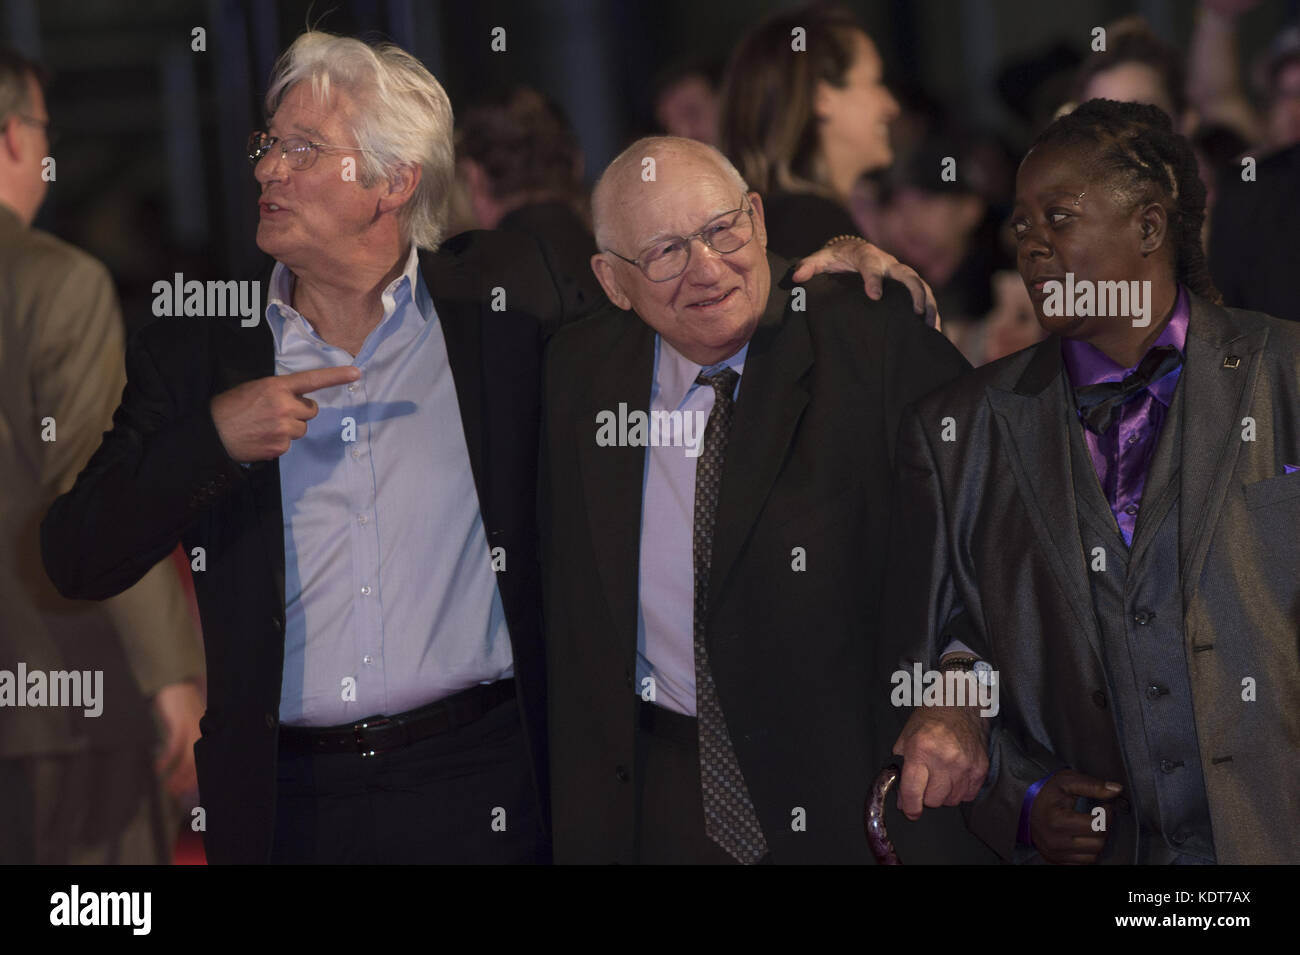 Directors and actors attend a premiere for 'Three Christs' at the  42nd Toronto International Film Festival (TIFF) in Toronto, Canada.  Featuring: Richard Gere, Homer George Gere Where: Toronto, Canada When: 14 Sep 2017 Credit: Euan Cherry/WENN.com Stock Photo